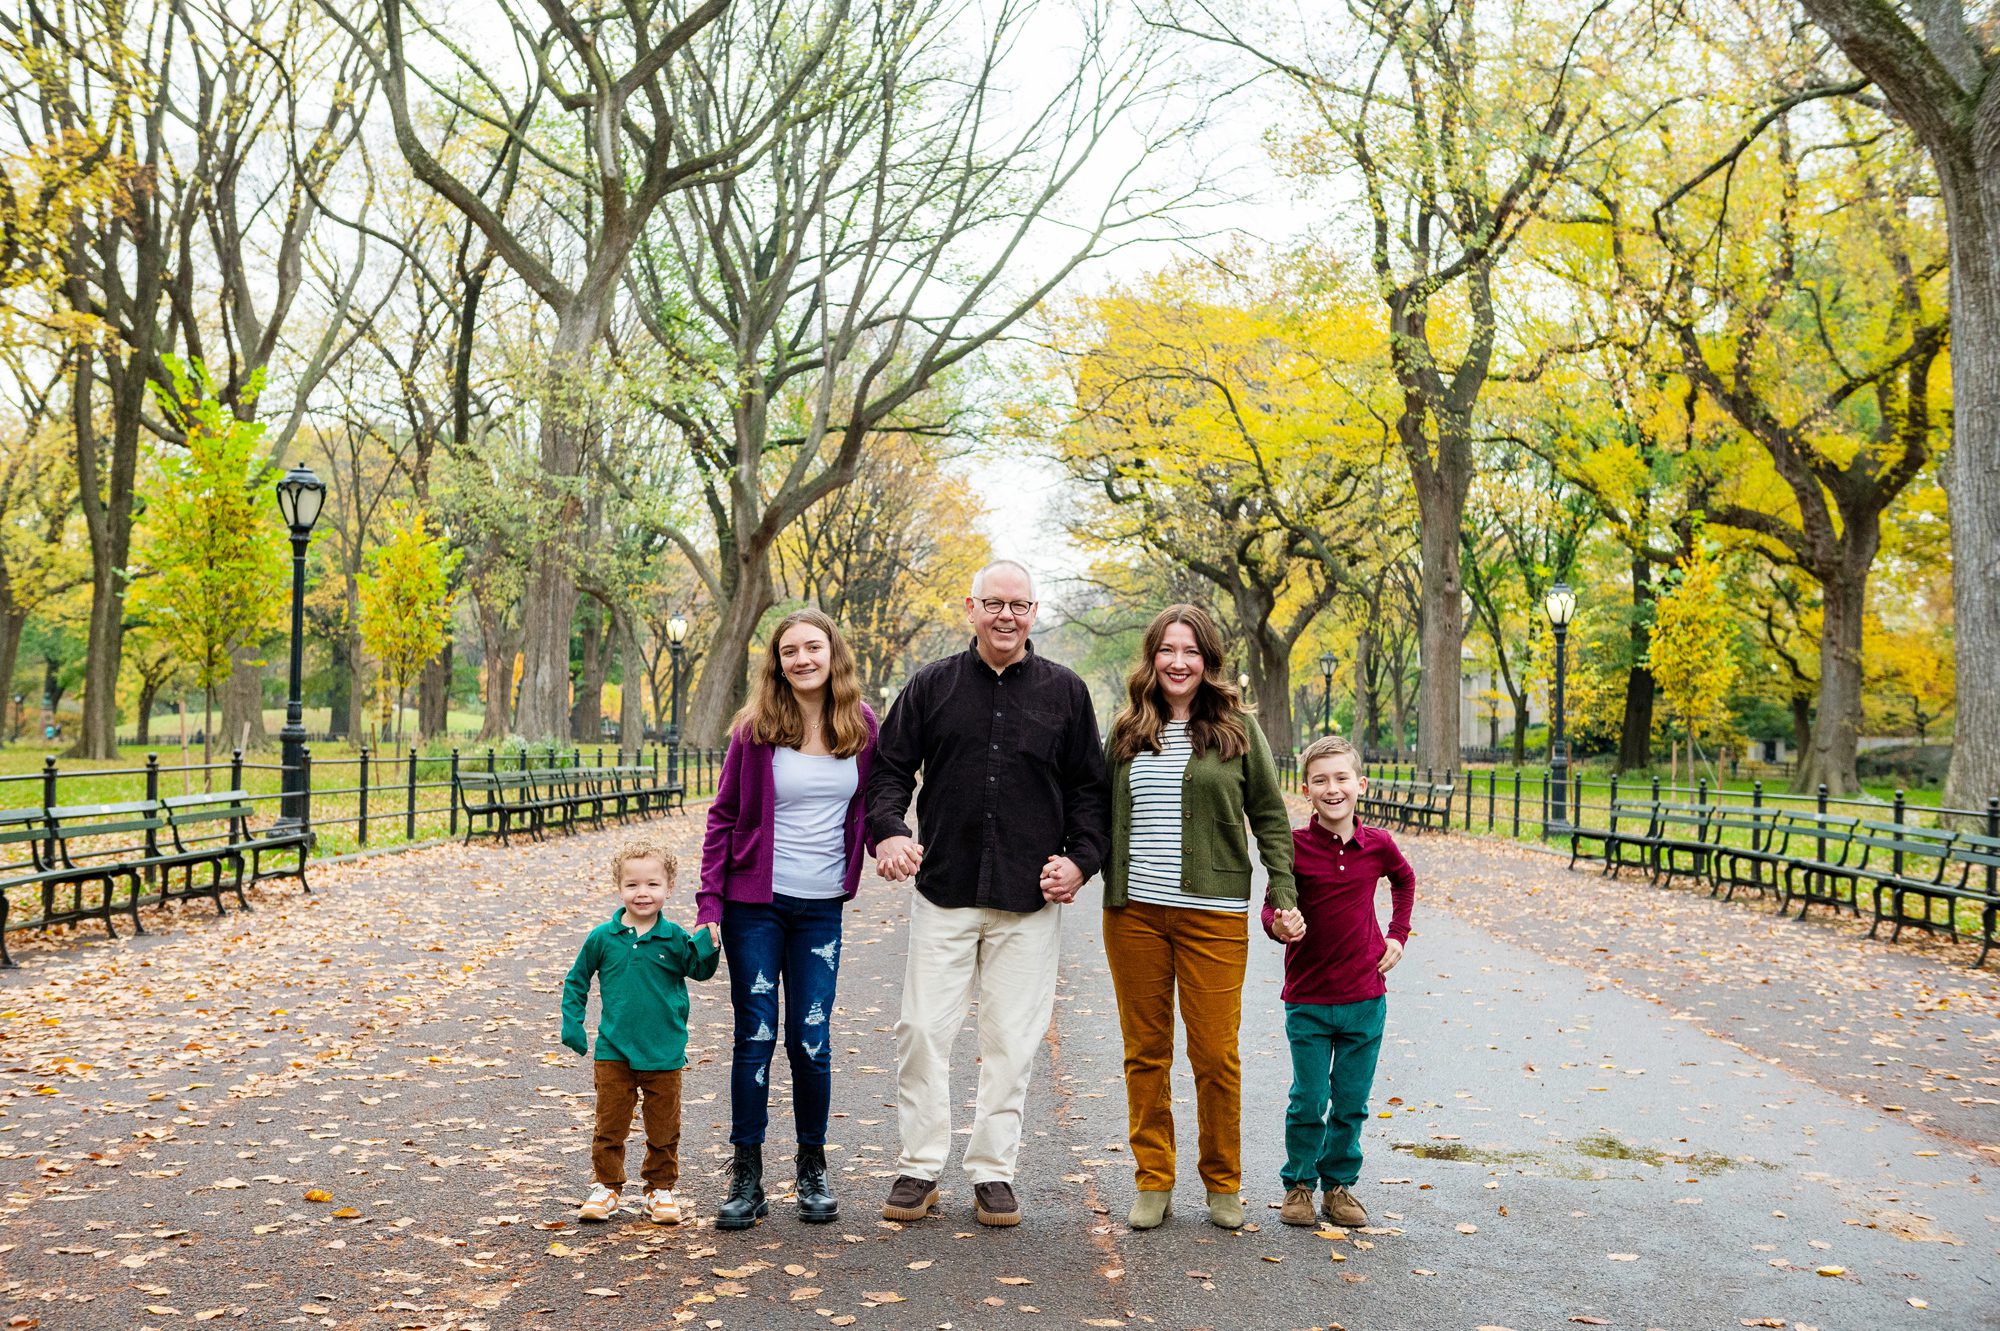 Family photography in Central Park in the fall. Family walking on literary walk in Central Park 